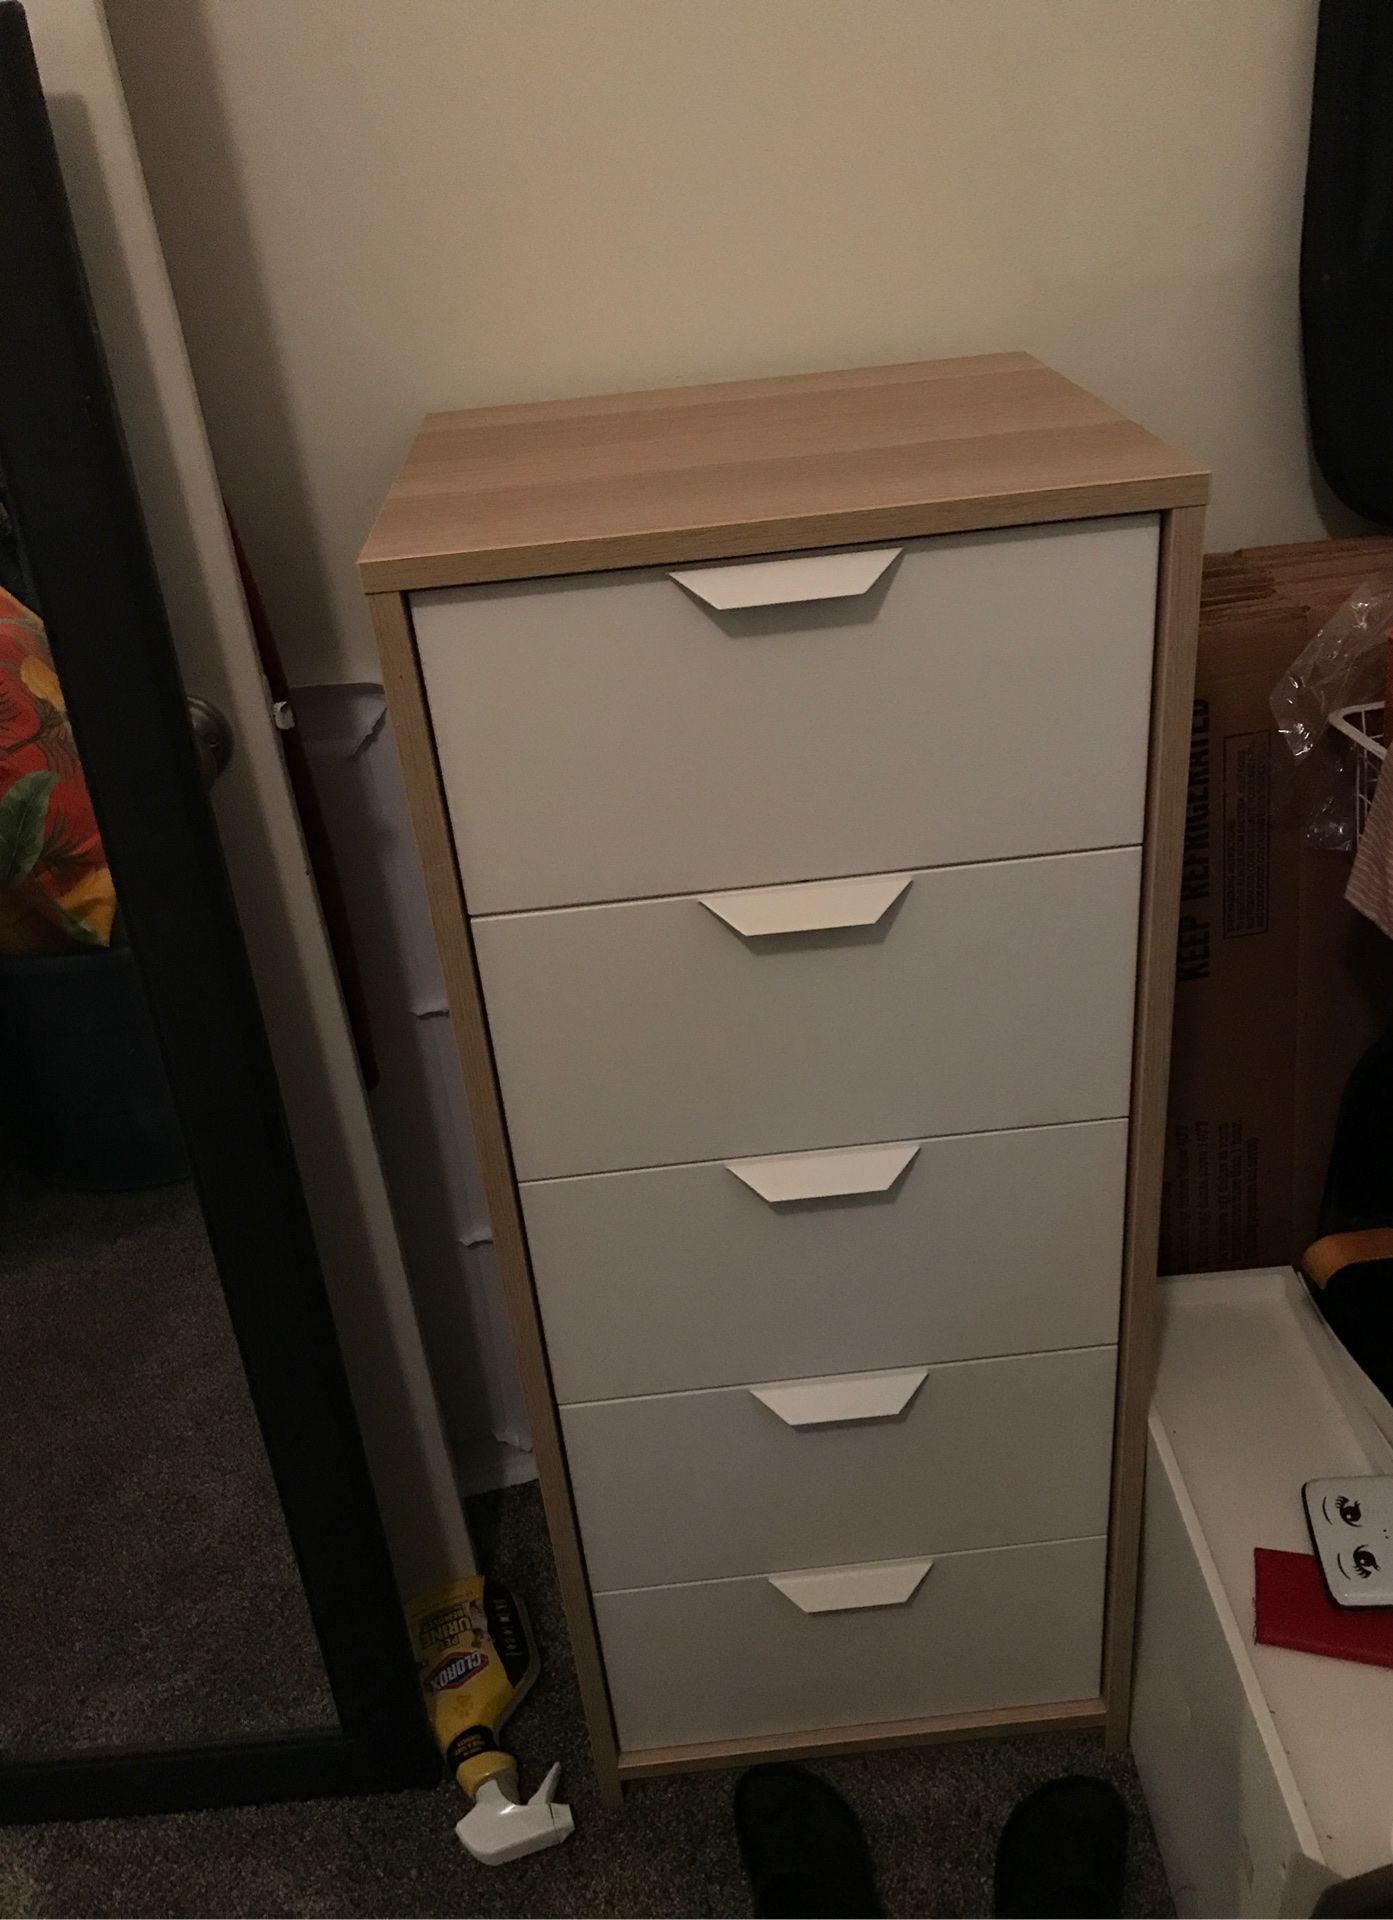 IKEA small 5 drawer chest brand new bought it a wk ago